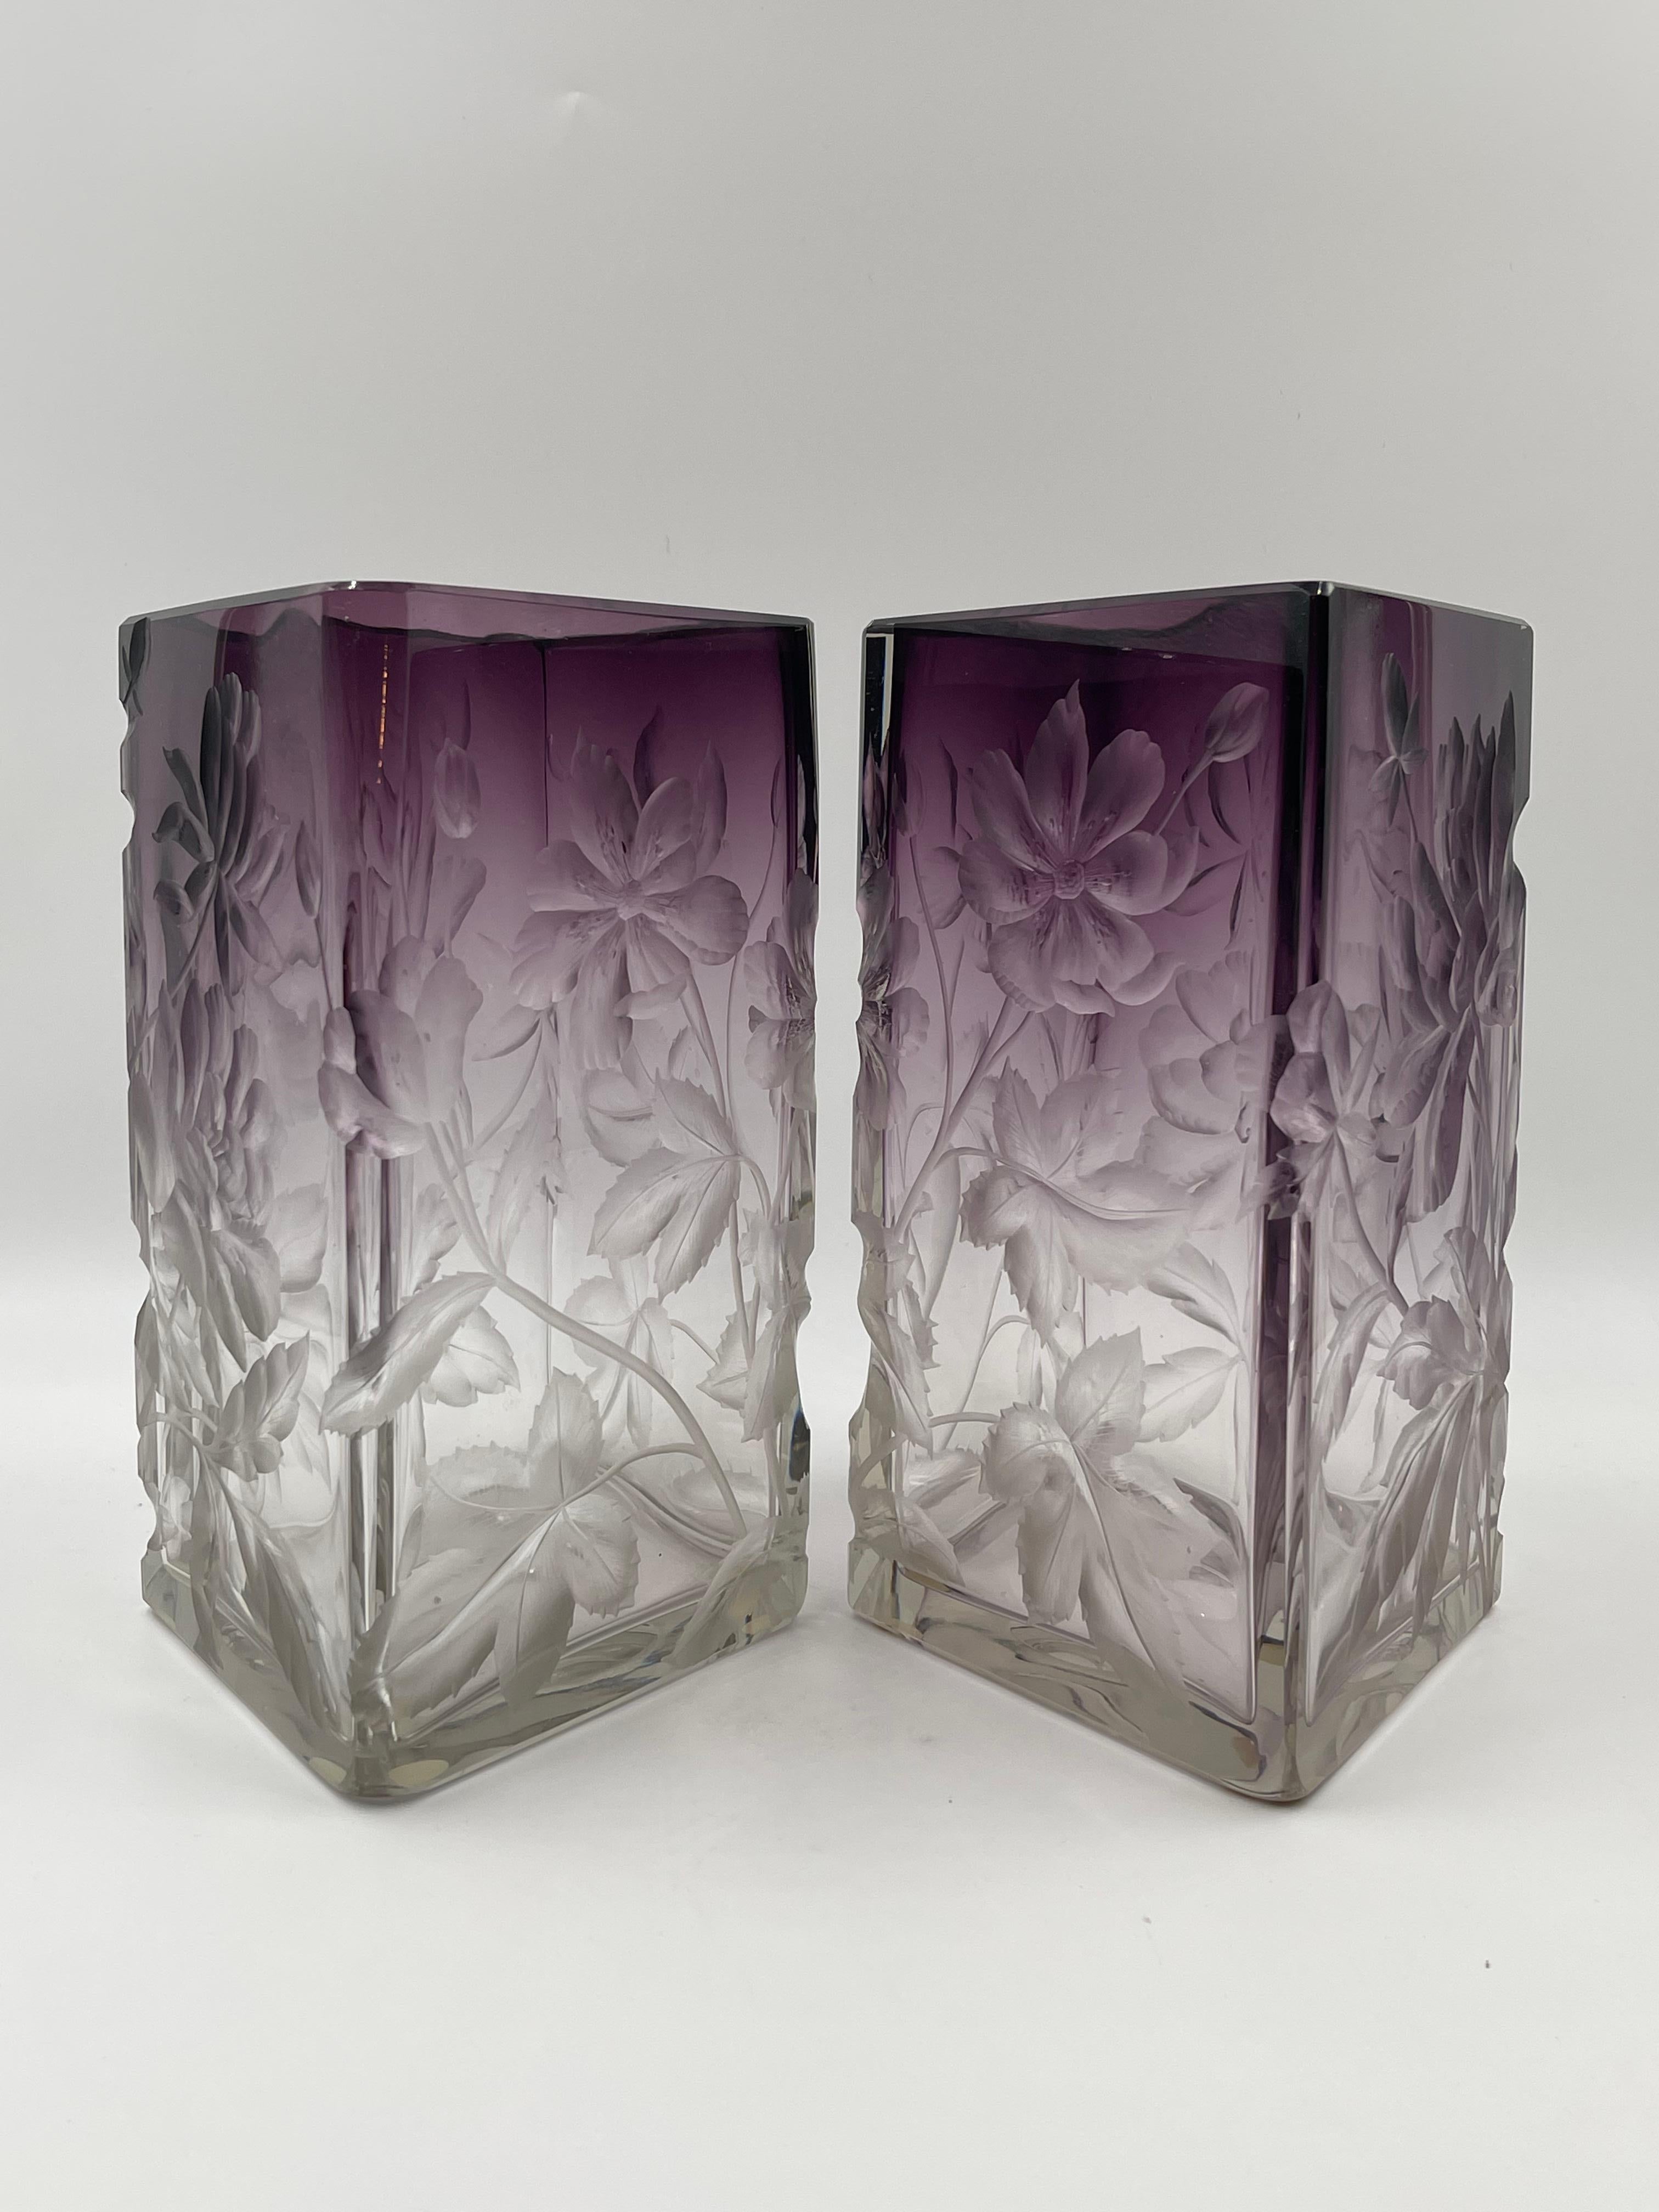 A very fine unusual pair of carved intaglio Moser vases. They are in a rare Diamond shape and would look great on a mantle or sideboard.